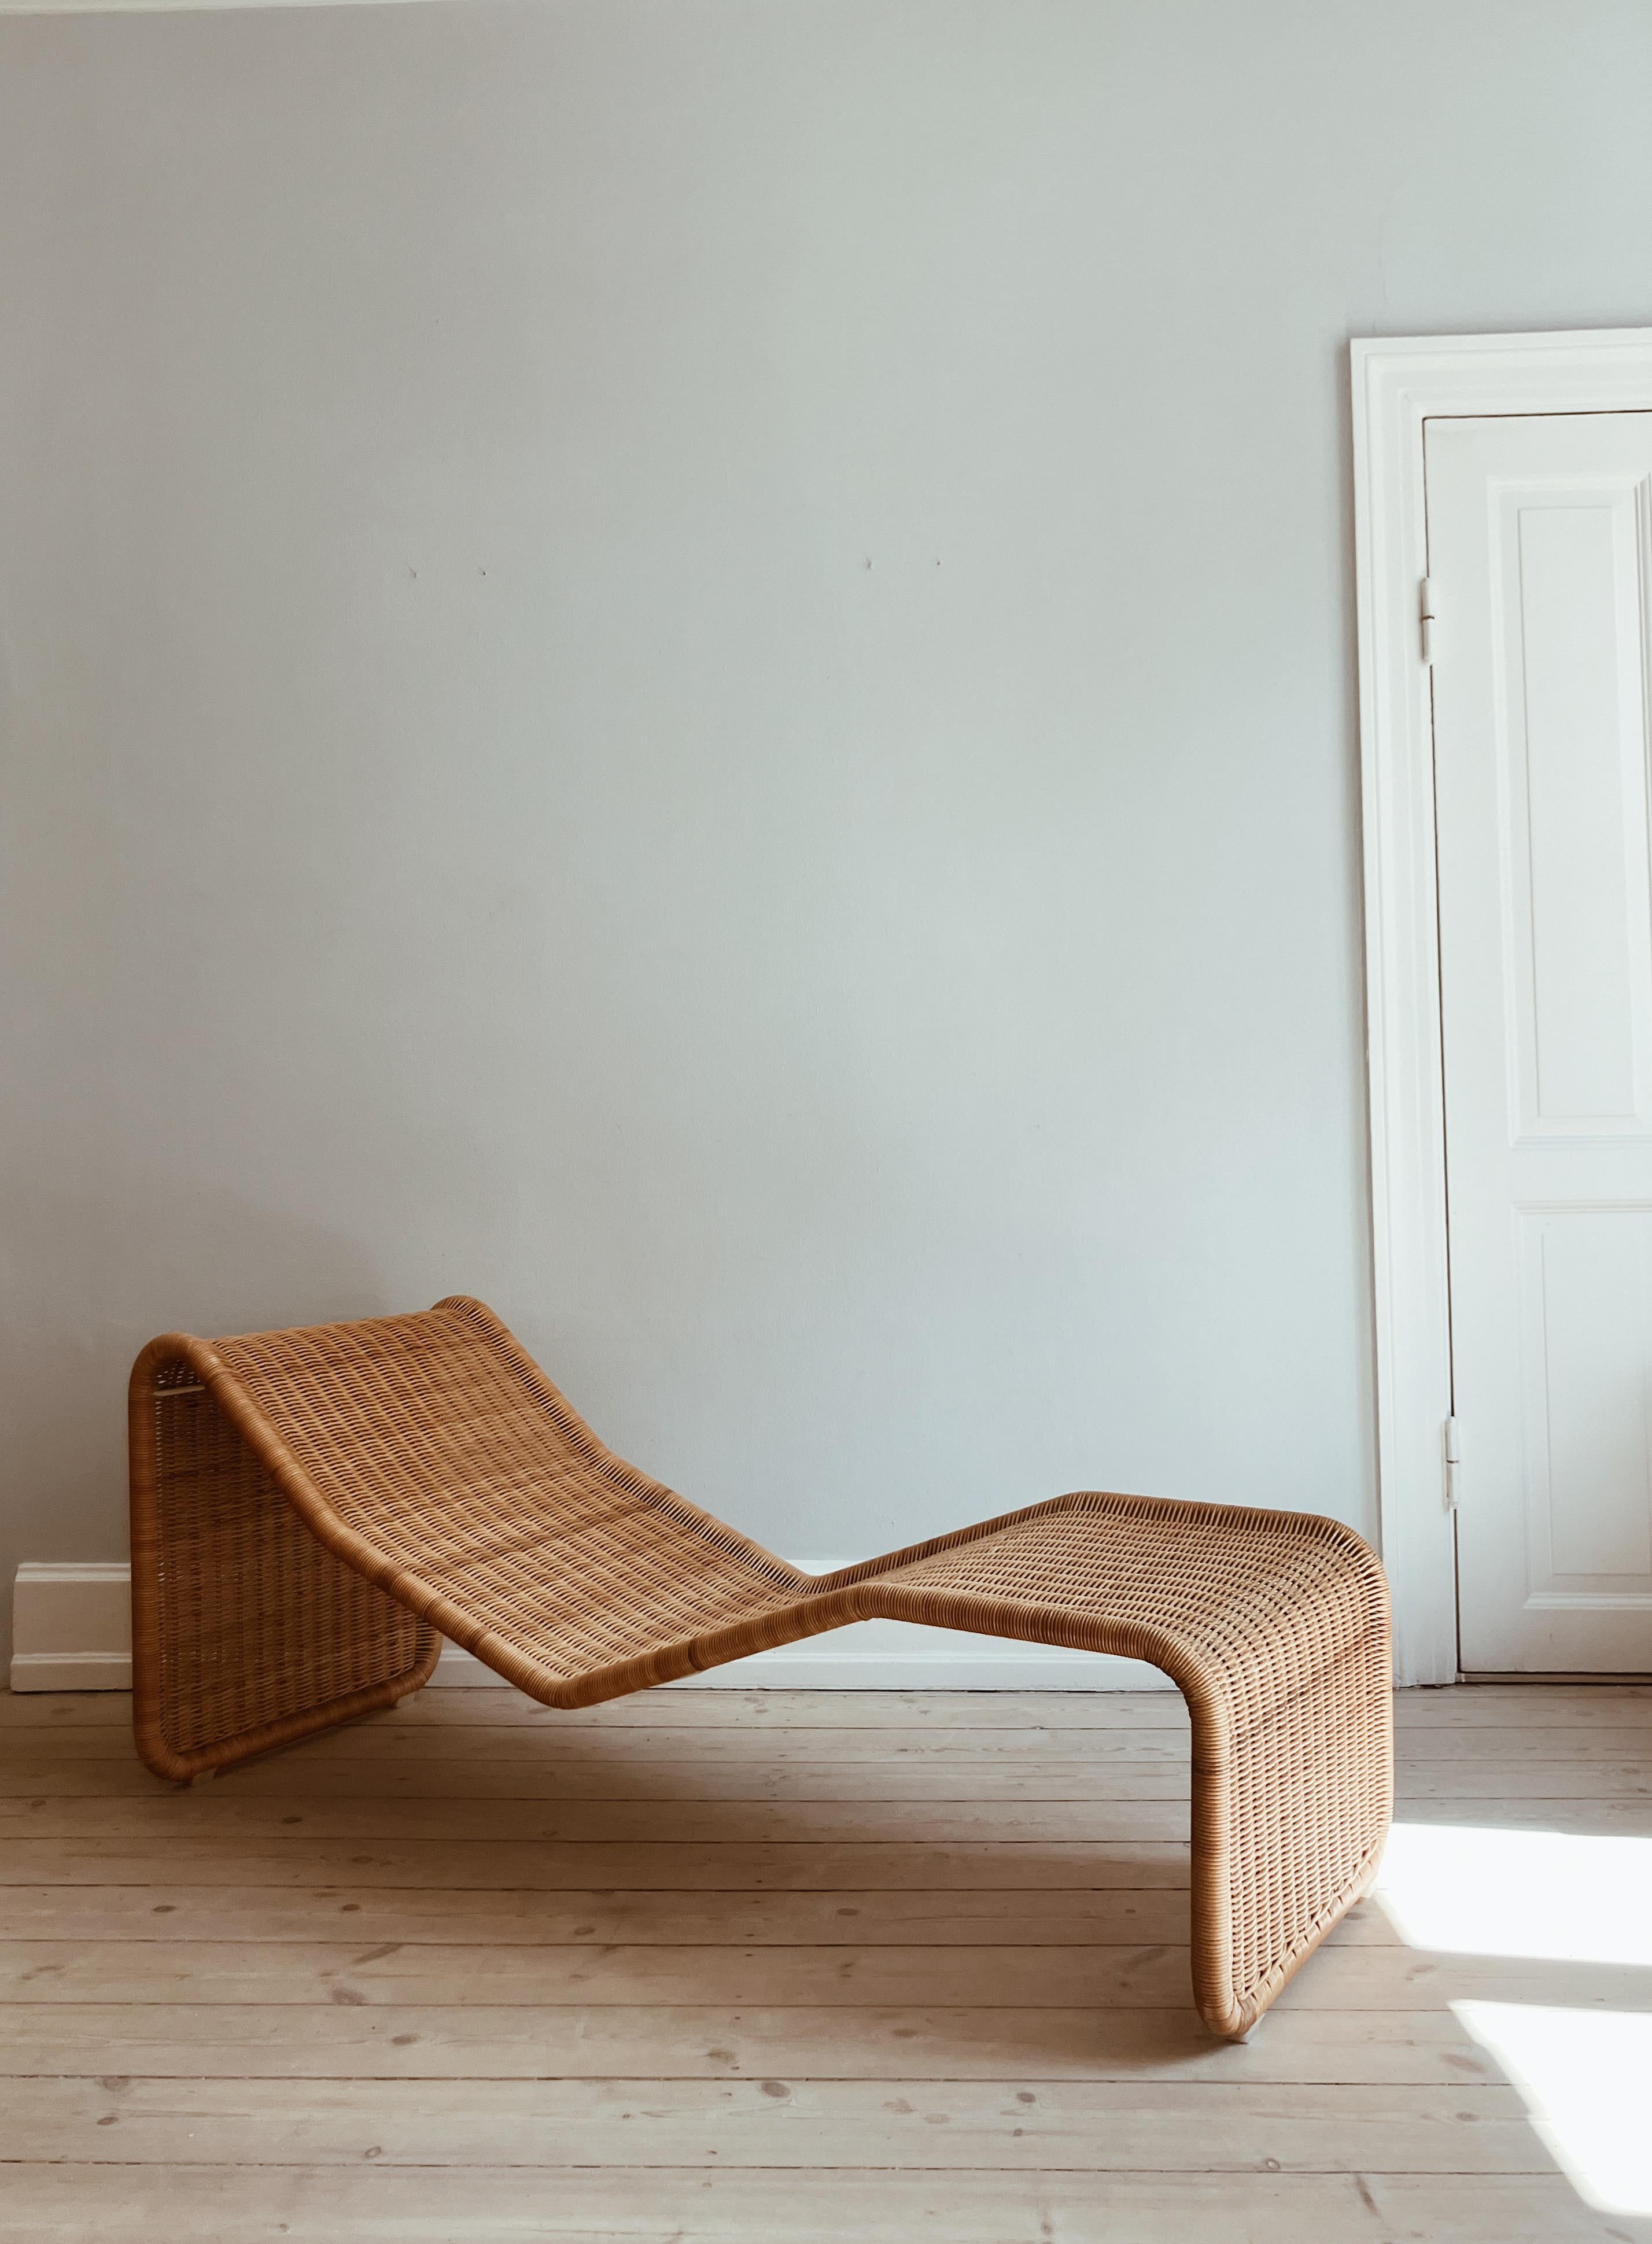 This iconic chaise longue was designed in 1964 by Tito Agnoli, and is produced by Bonacina in Italy. This chaise longue is dated to the early 80s or even earlier.

The model is the original with brass buttons on the back.

Very nice condition